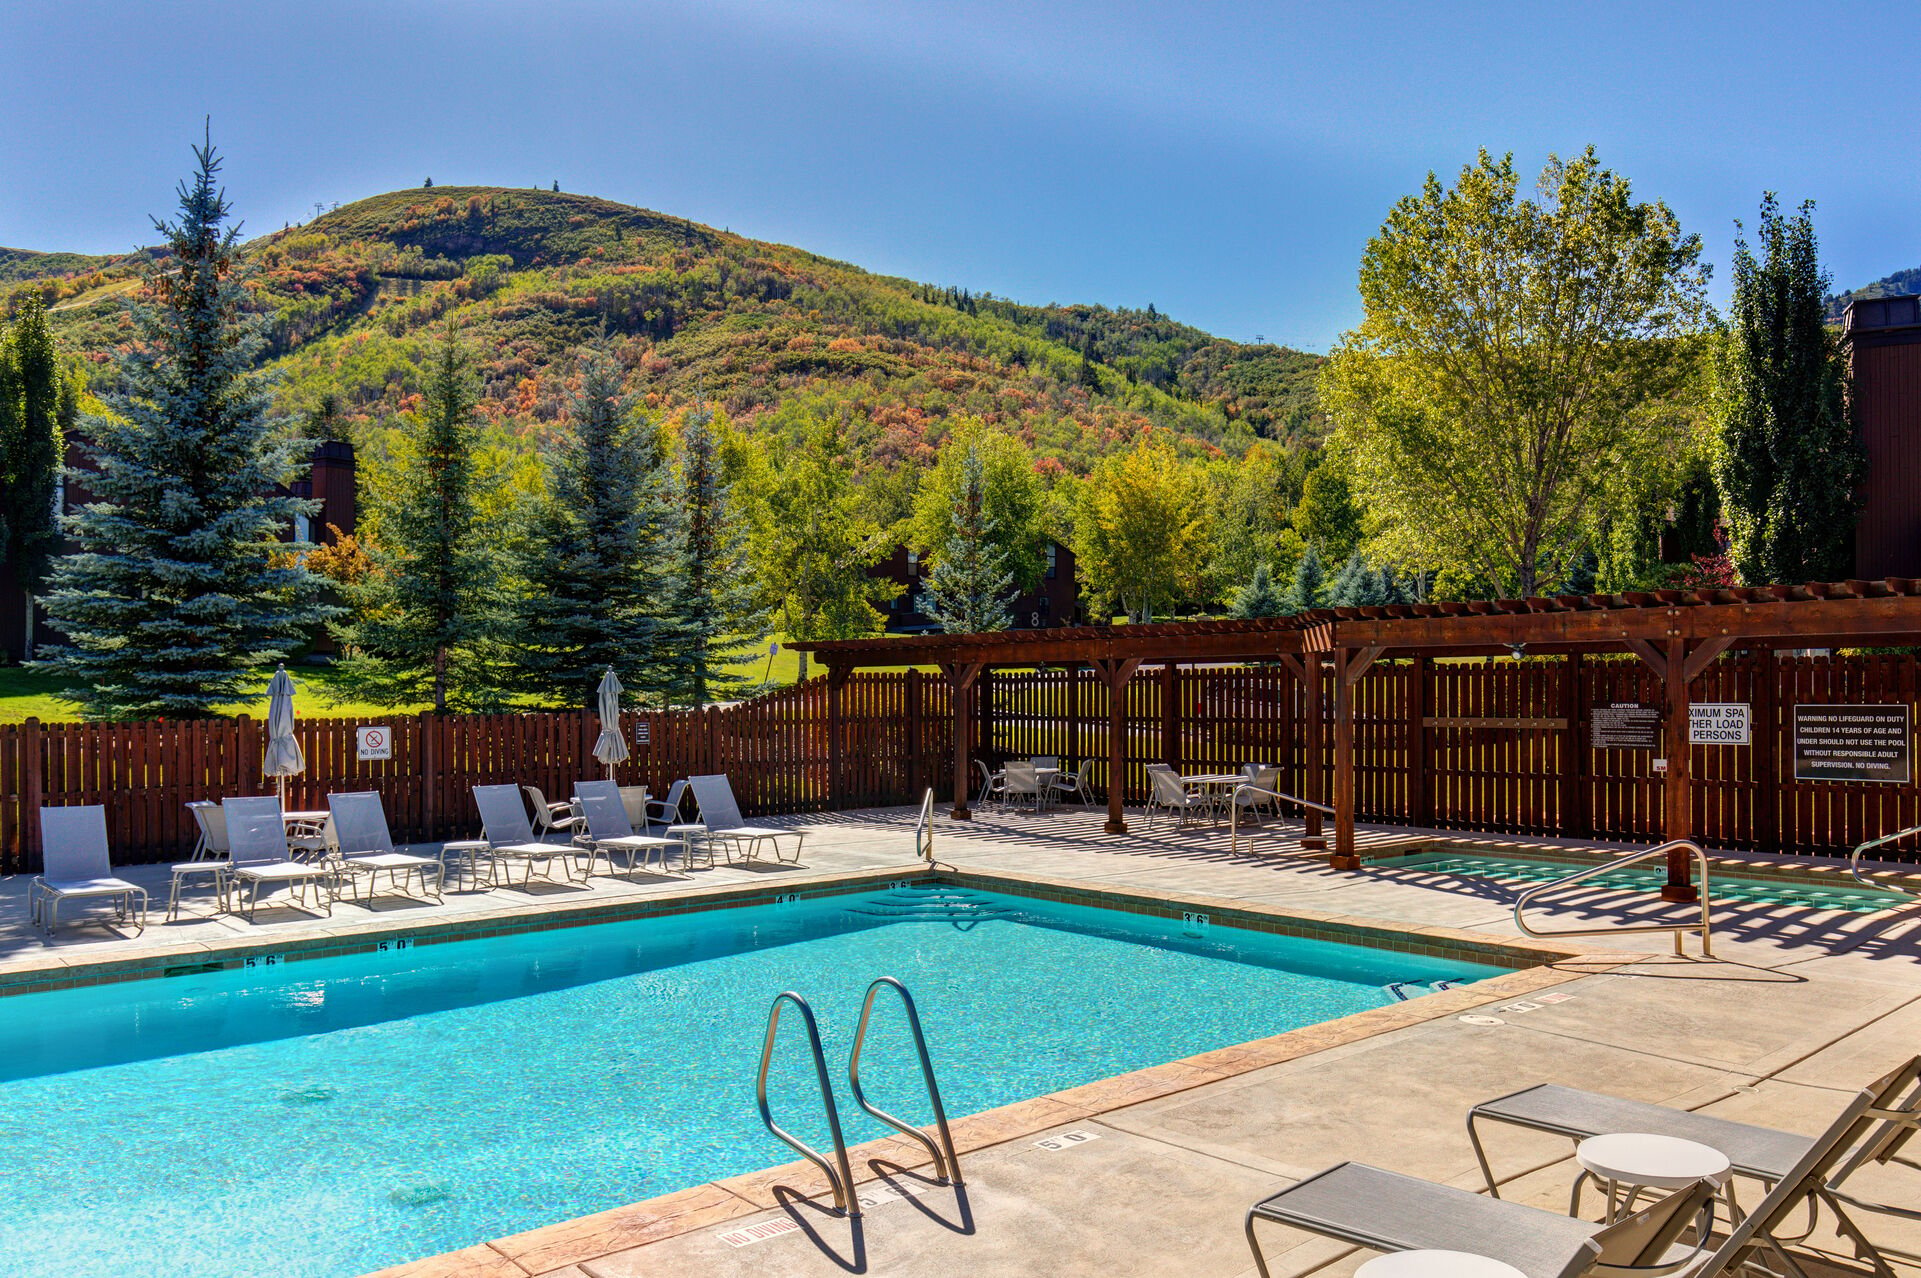 Three Kings Communal Amenities with a Full Kitchen, Smart TV, Fireplace, Ample Seating, Sauna, Men and Women's Locker Rooms, Pool and Hot Tub